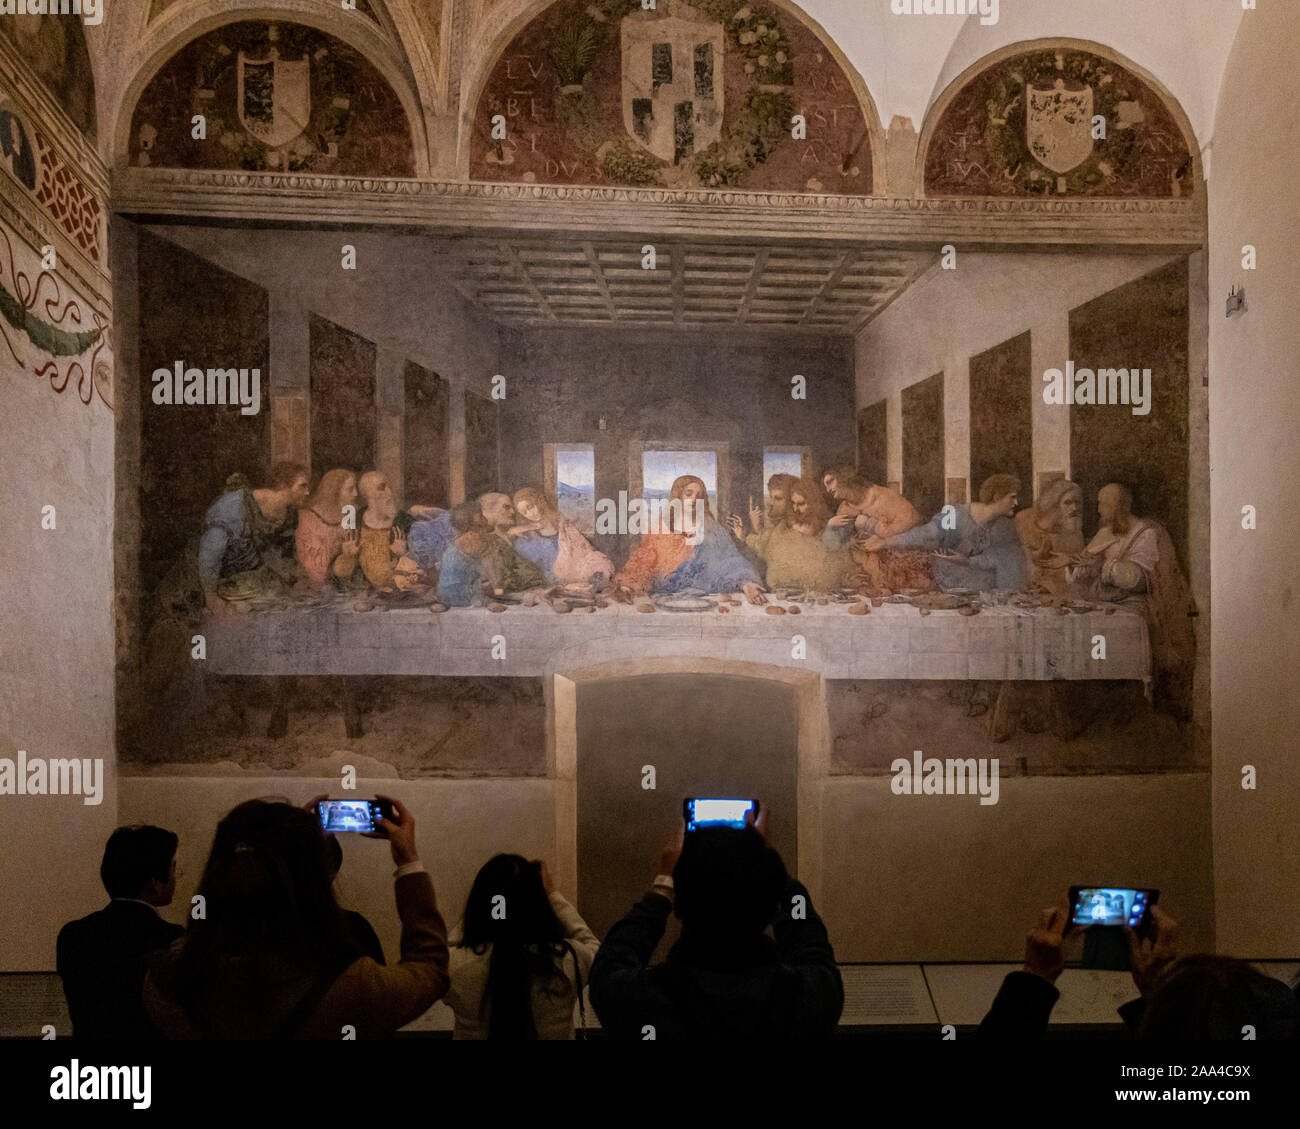 Milan, Italy - Nov 6, 2019: Smartphone addicted tourists taking photos while visiting the Last Supper mural painting by Leonardo da Vinci in the refec Stock Photo